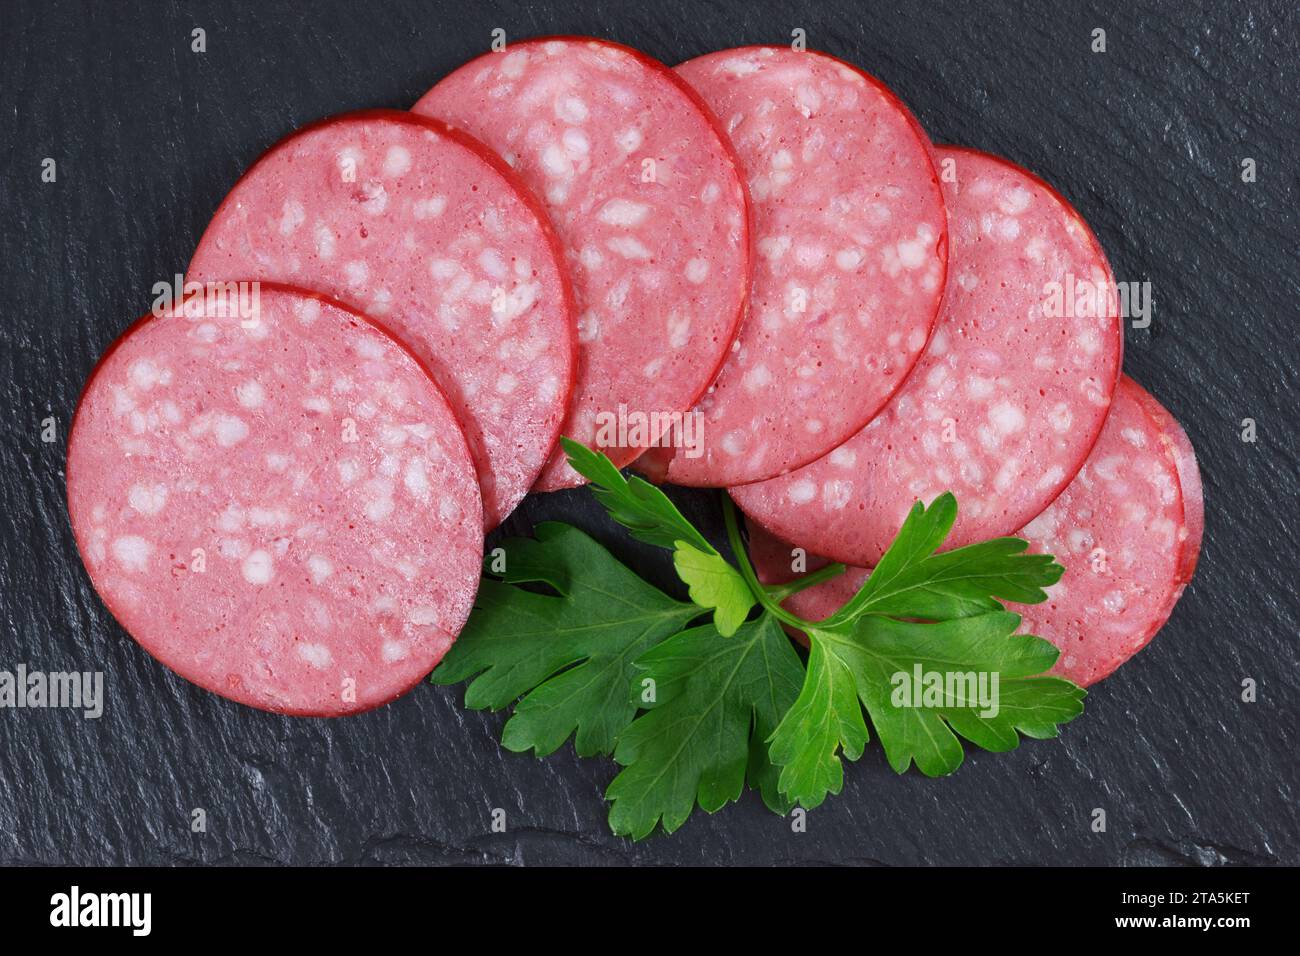 Pork Meat Smoked Sausage Cervelat Sliced With Parsley Leaf On Shale Stone Plate, Top View Flat Layout Stock Photo